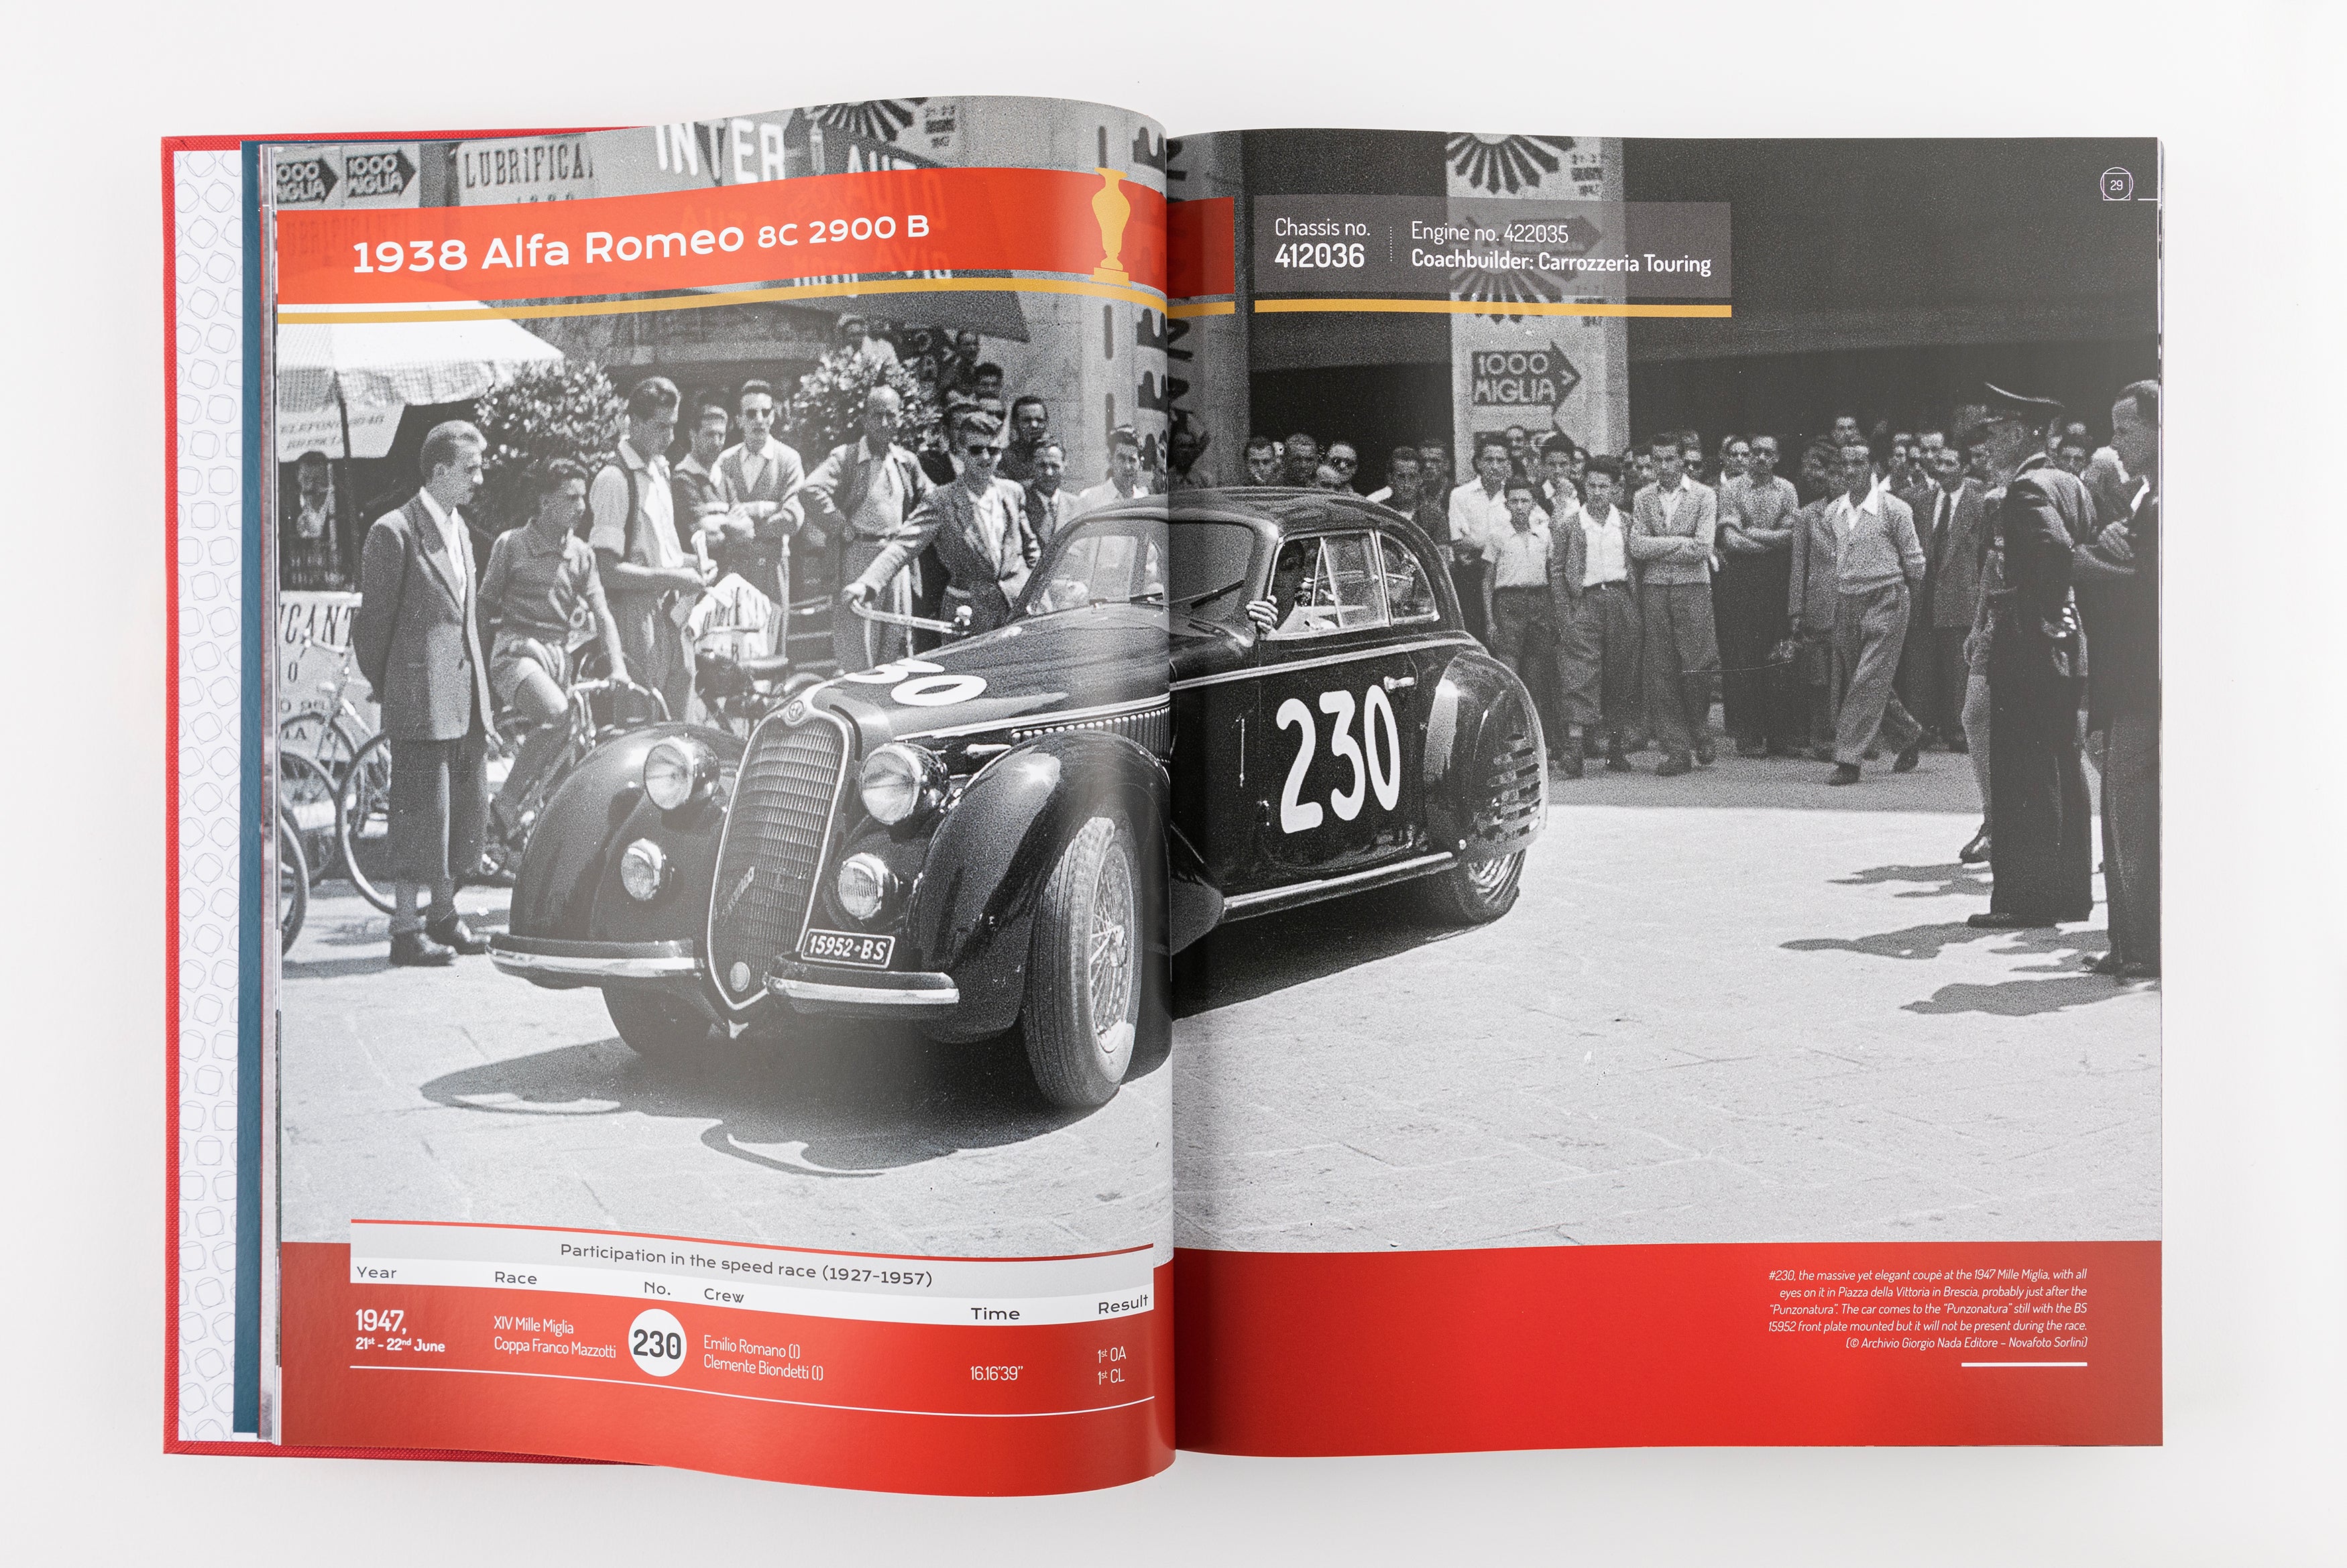 MILLE MIGLIA’S CHASSIS - Volume III